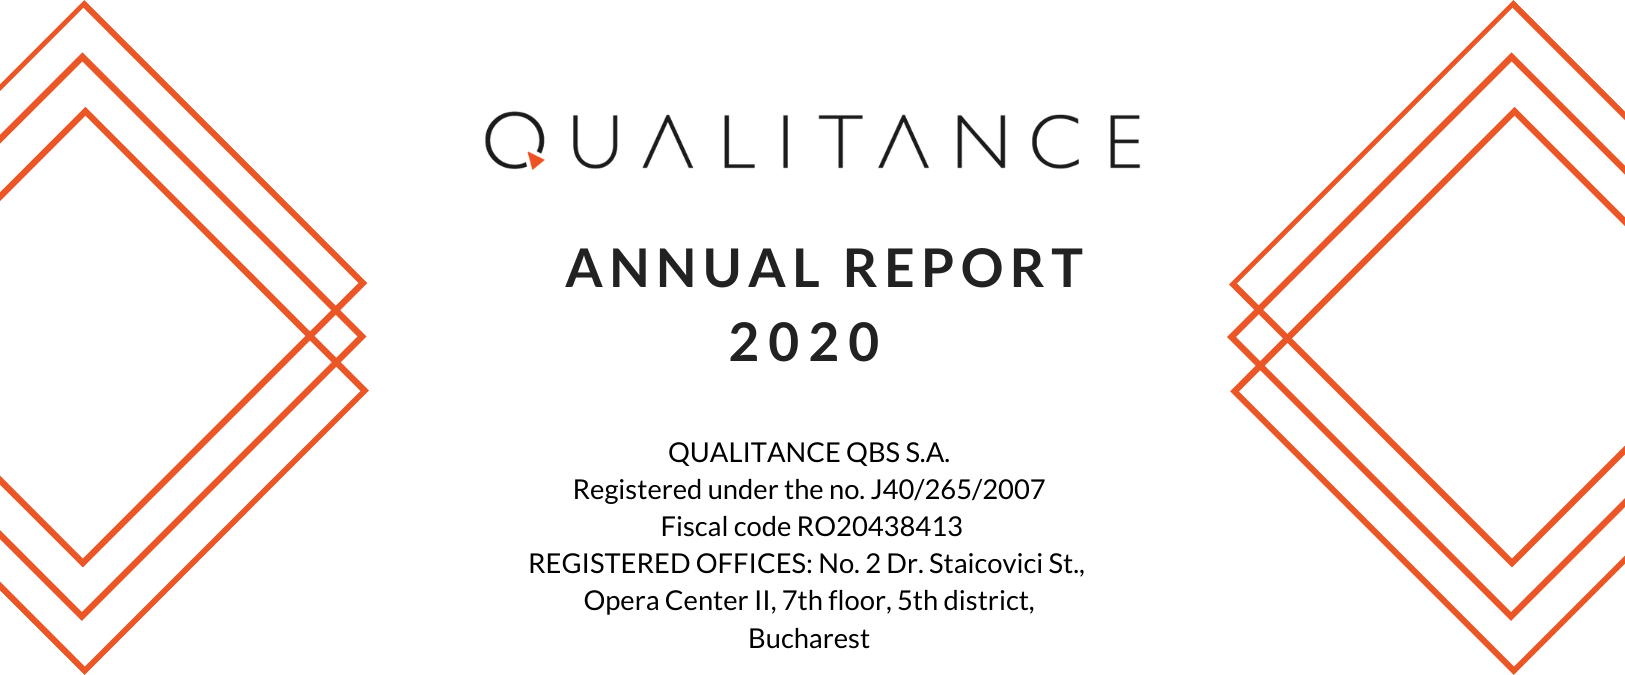 2020 Annual Report by QUALITANCE